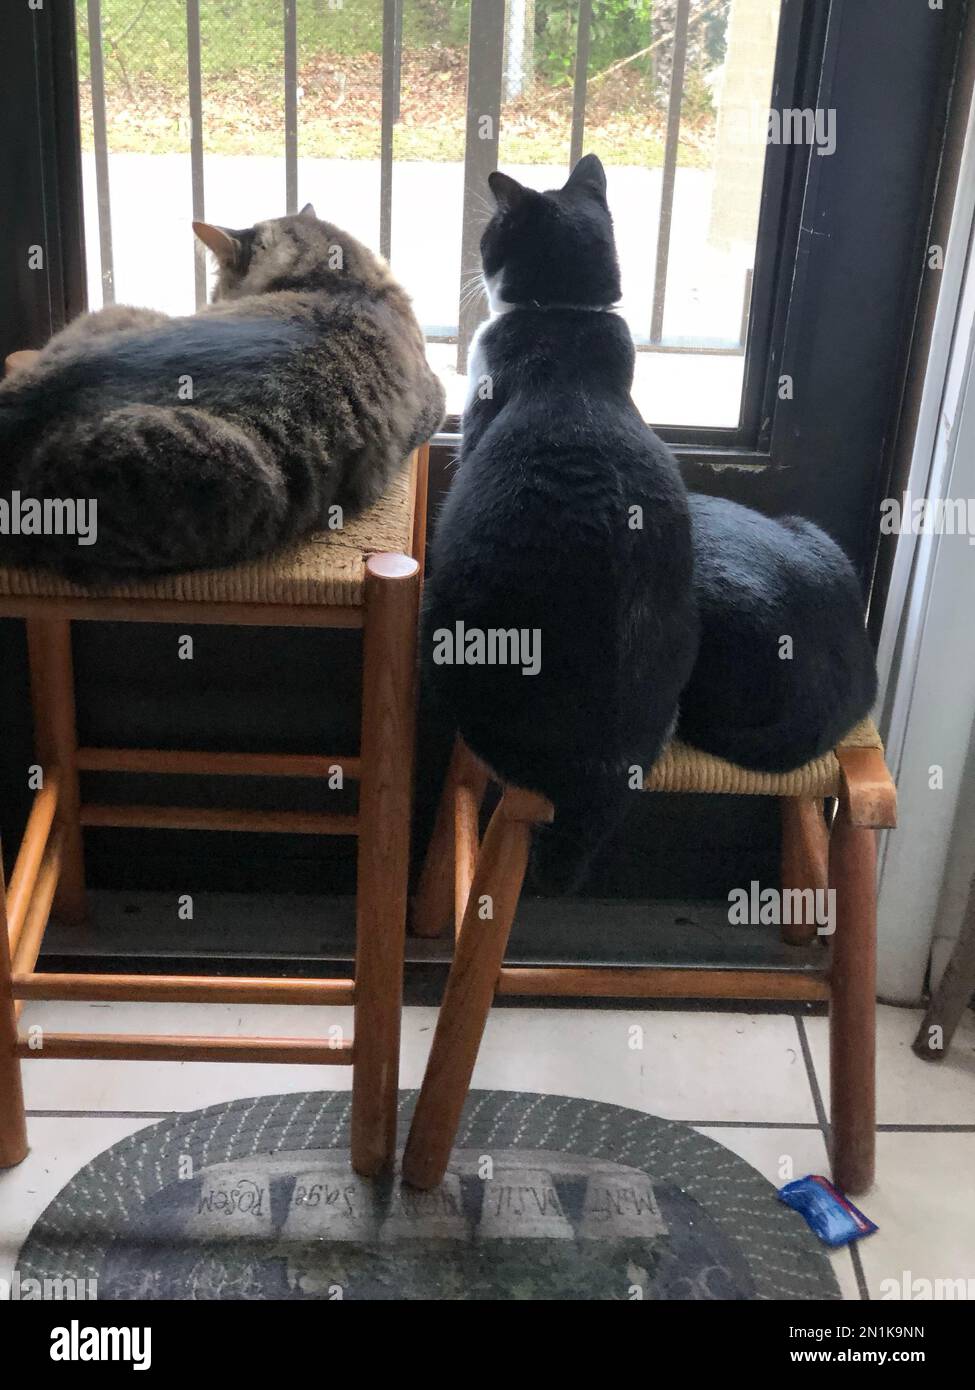 A vertical back view of cats laying on chairs and looking out of a window Stock Photo